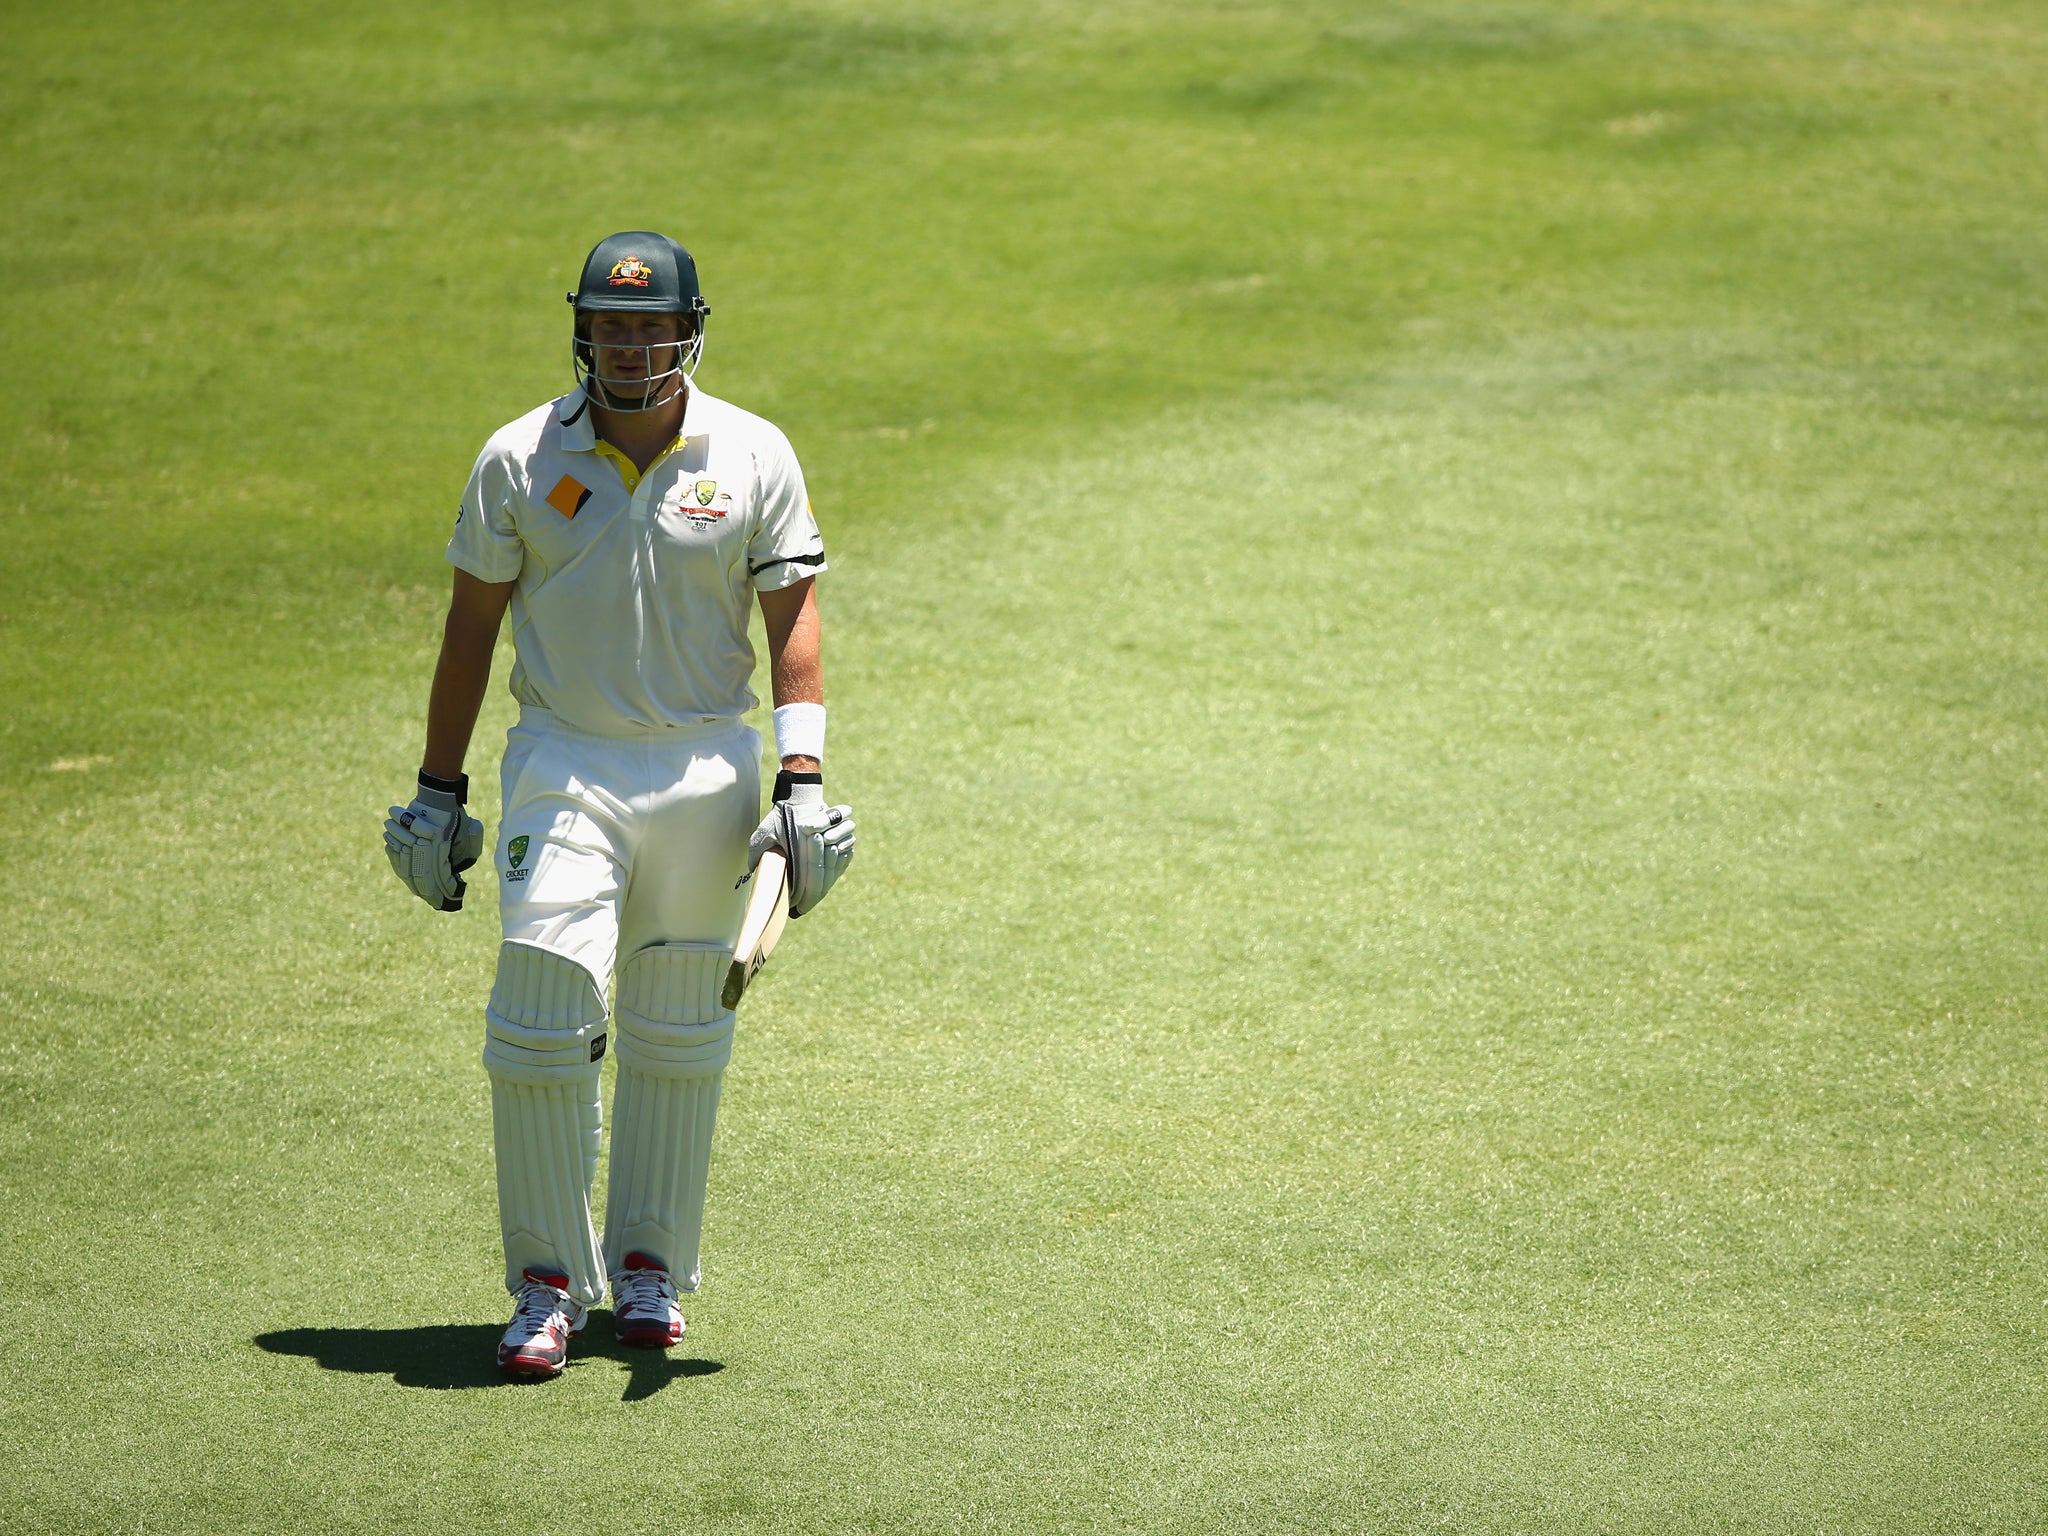 Shane Watson trudges off after the fall of his wicket in the Third Test